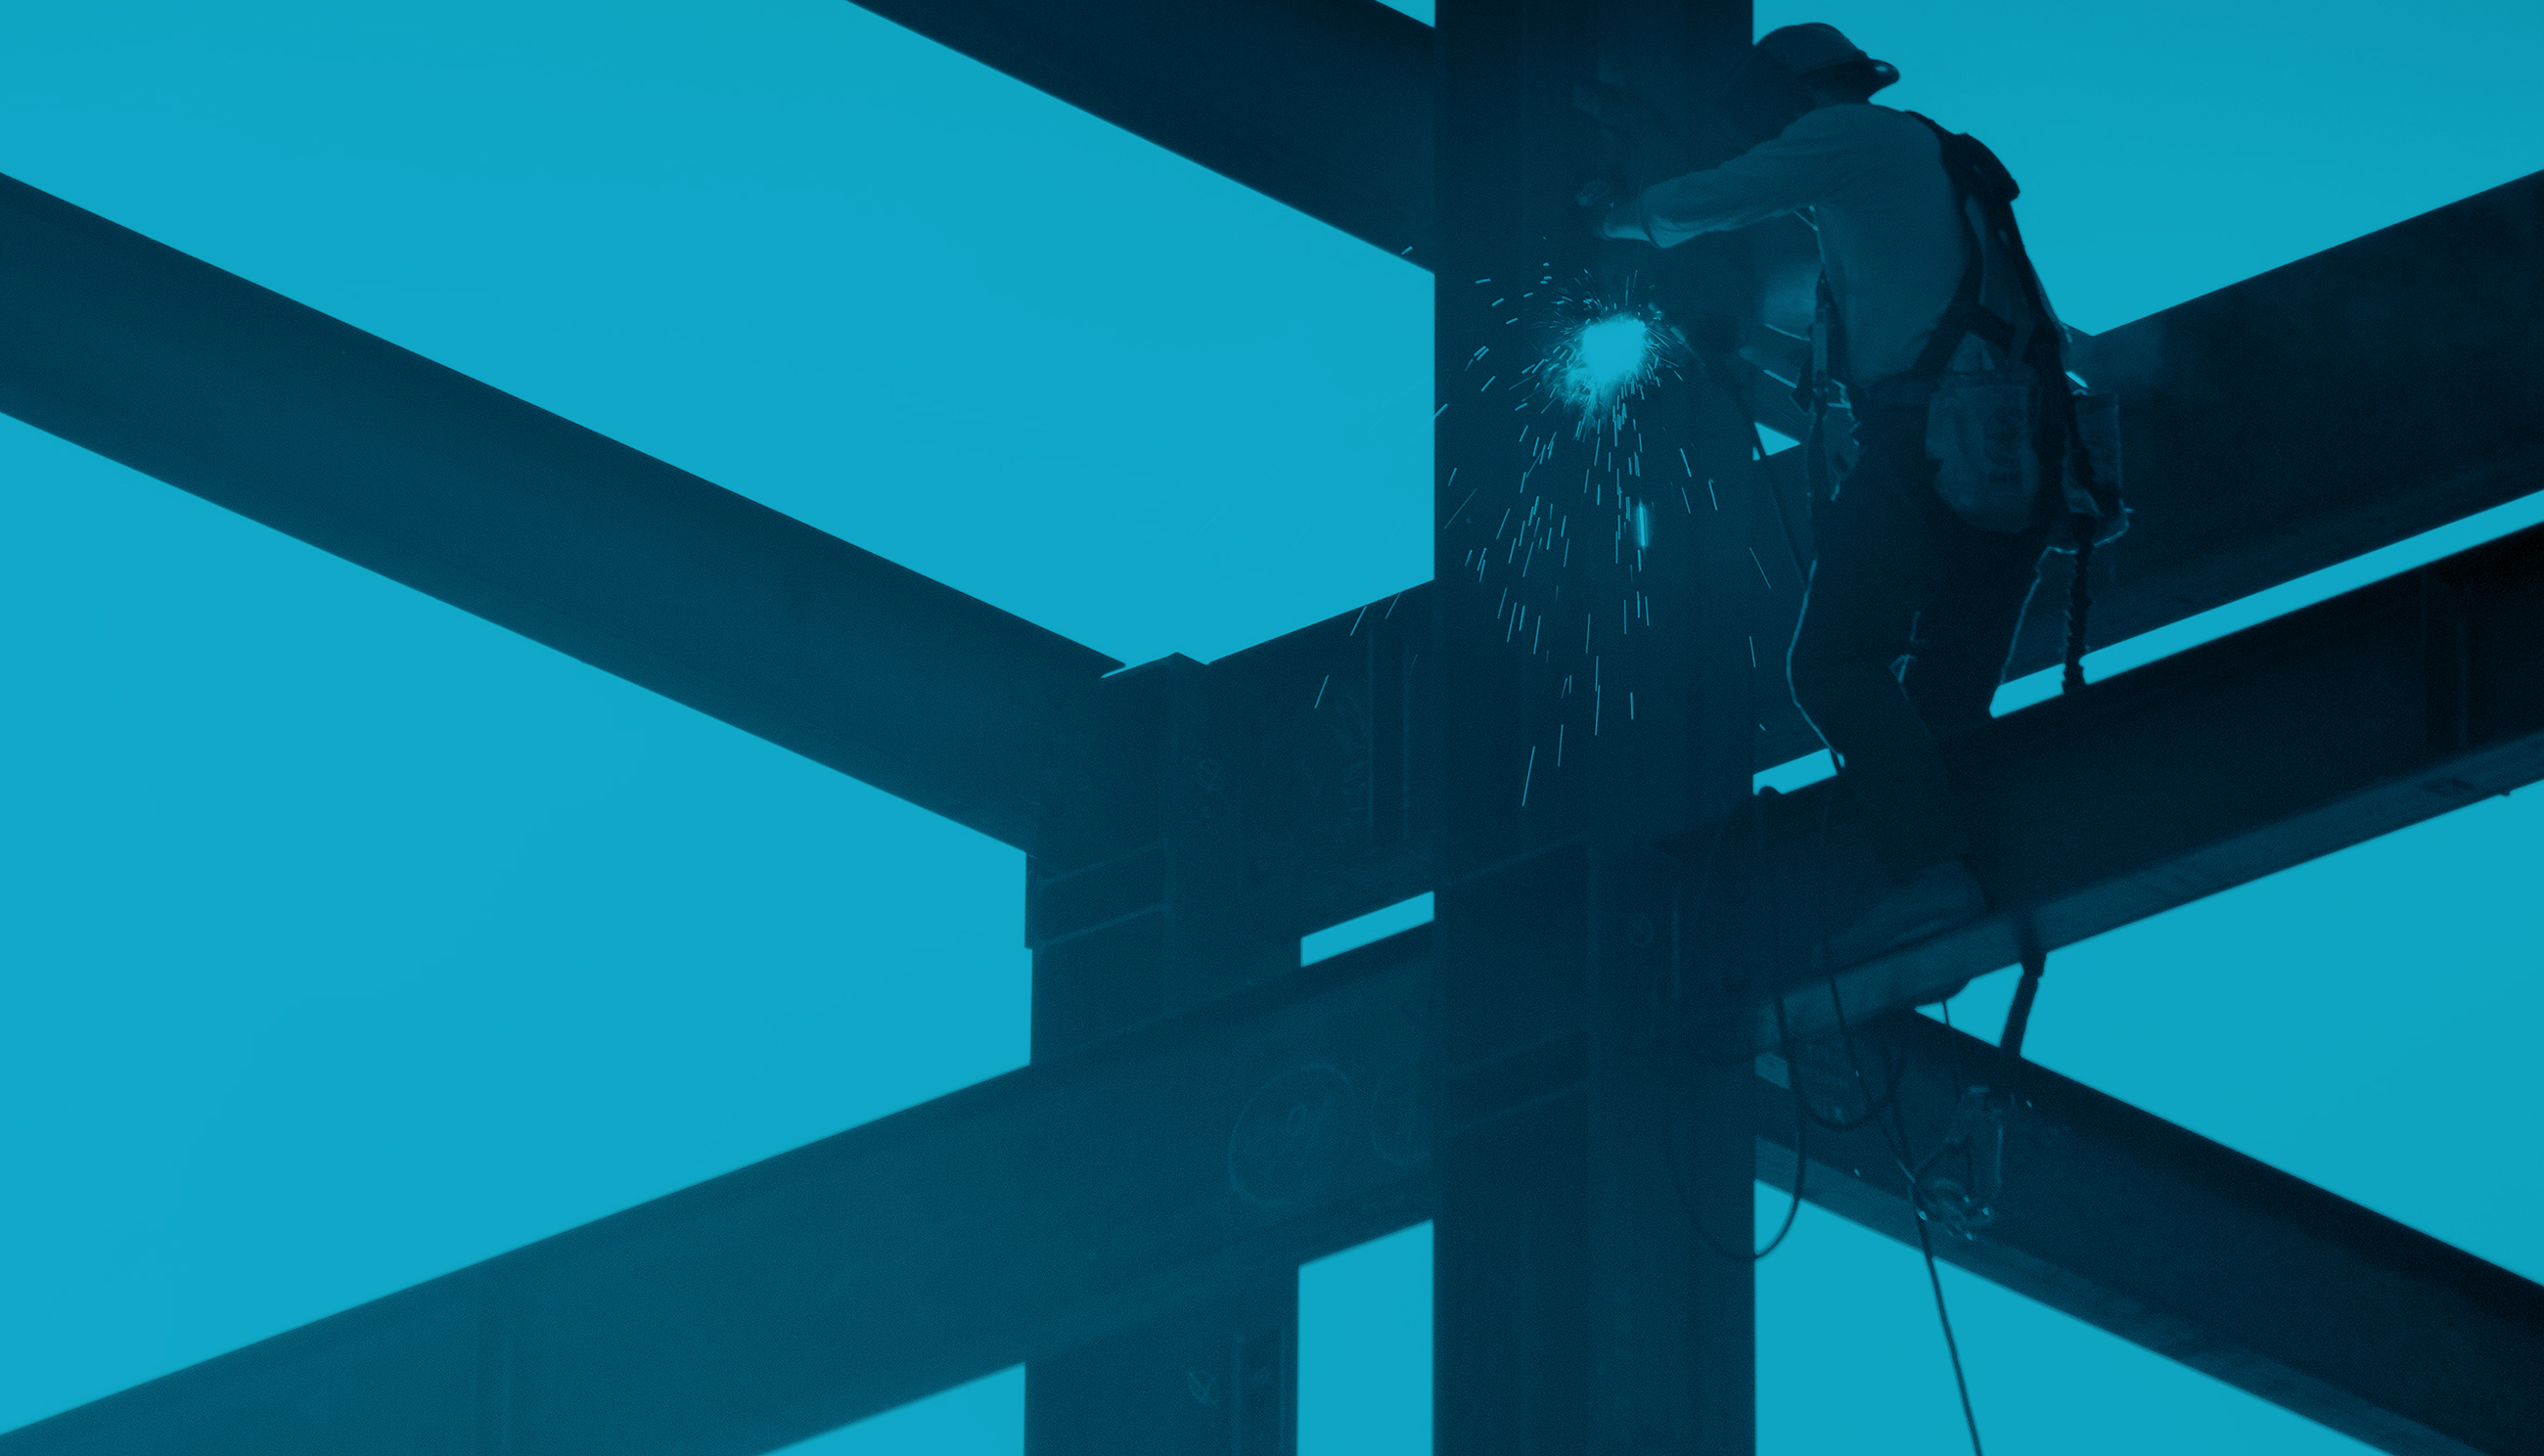 Construction worker on steal support beam welding. With a sky blue tint over the entire image.